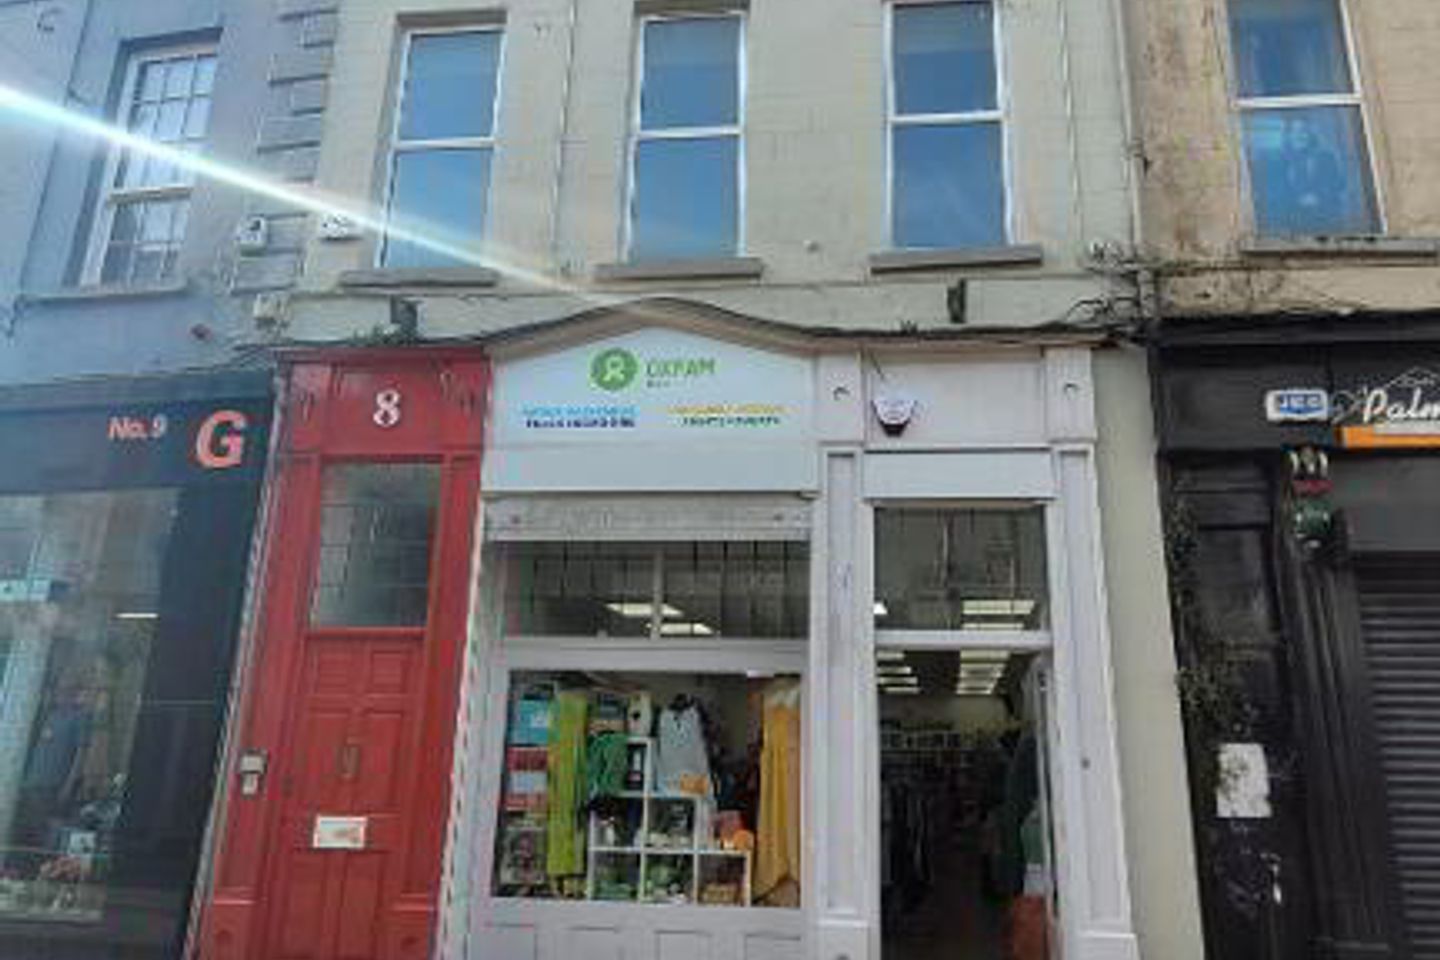 8 Great George's Street, Waterford City, Co. Waterford